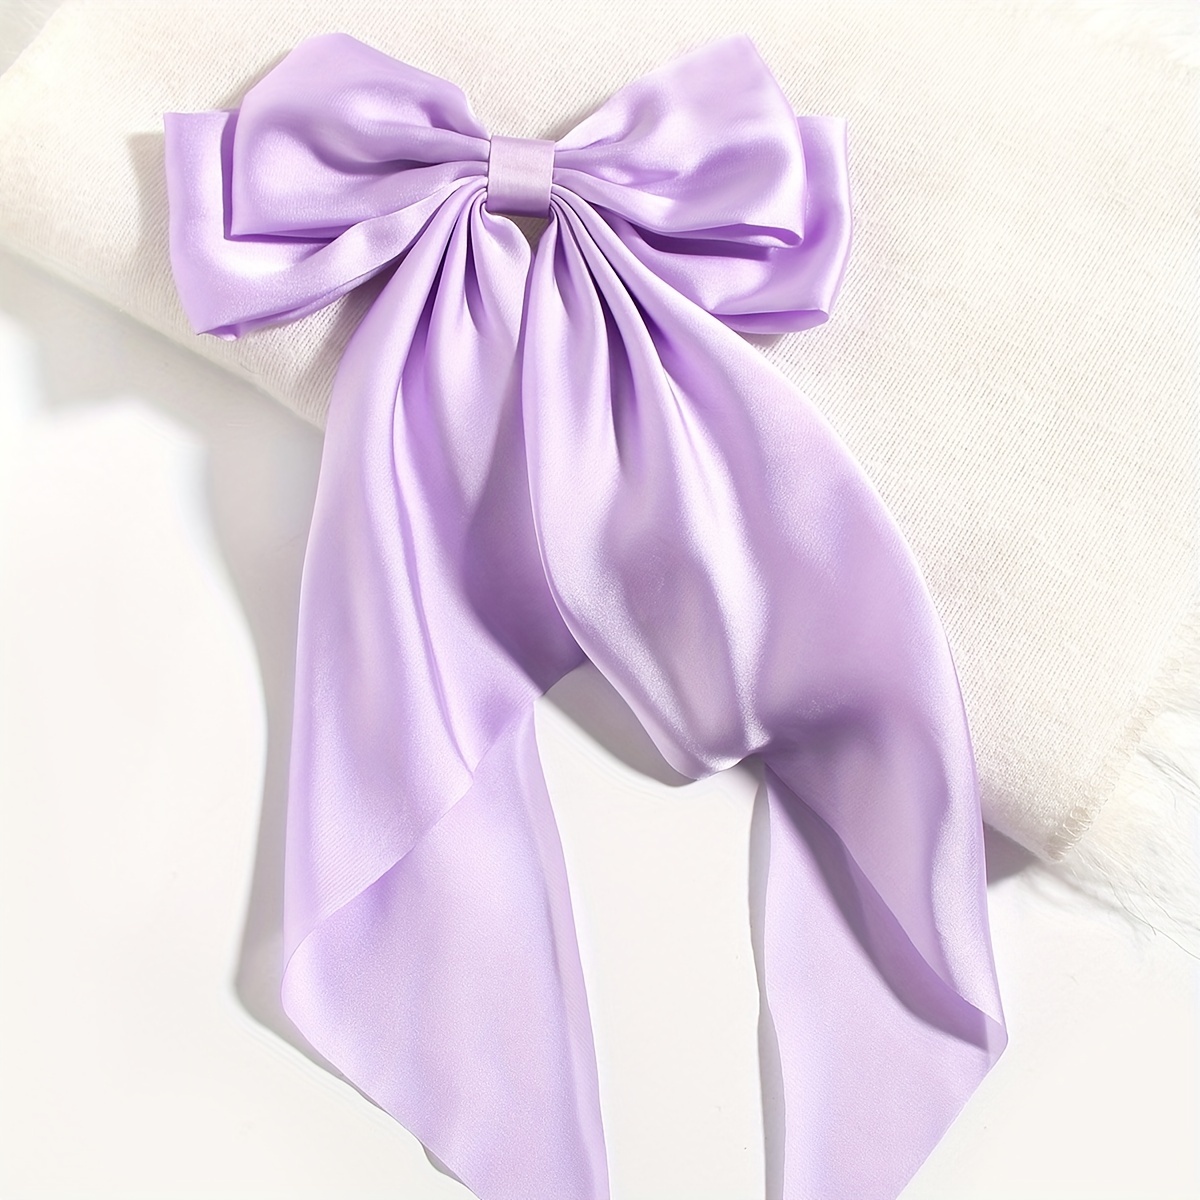 Tsetuip Large Satin Silk Hair Bows for Women Lace Purple Tulle Hair Ribbon Chiffon Bow for Girls Small Butterfly Claw Clips for Thin Hair Accessories(Purple)